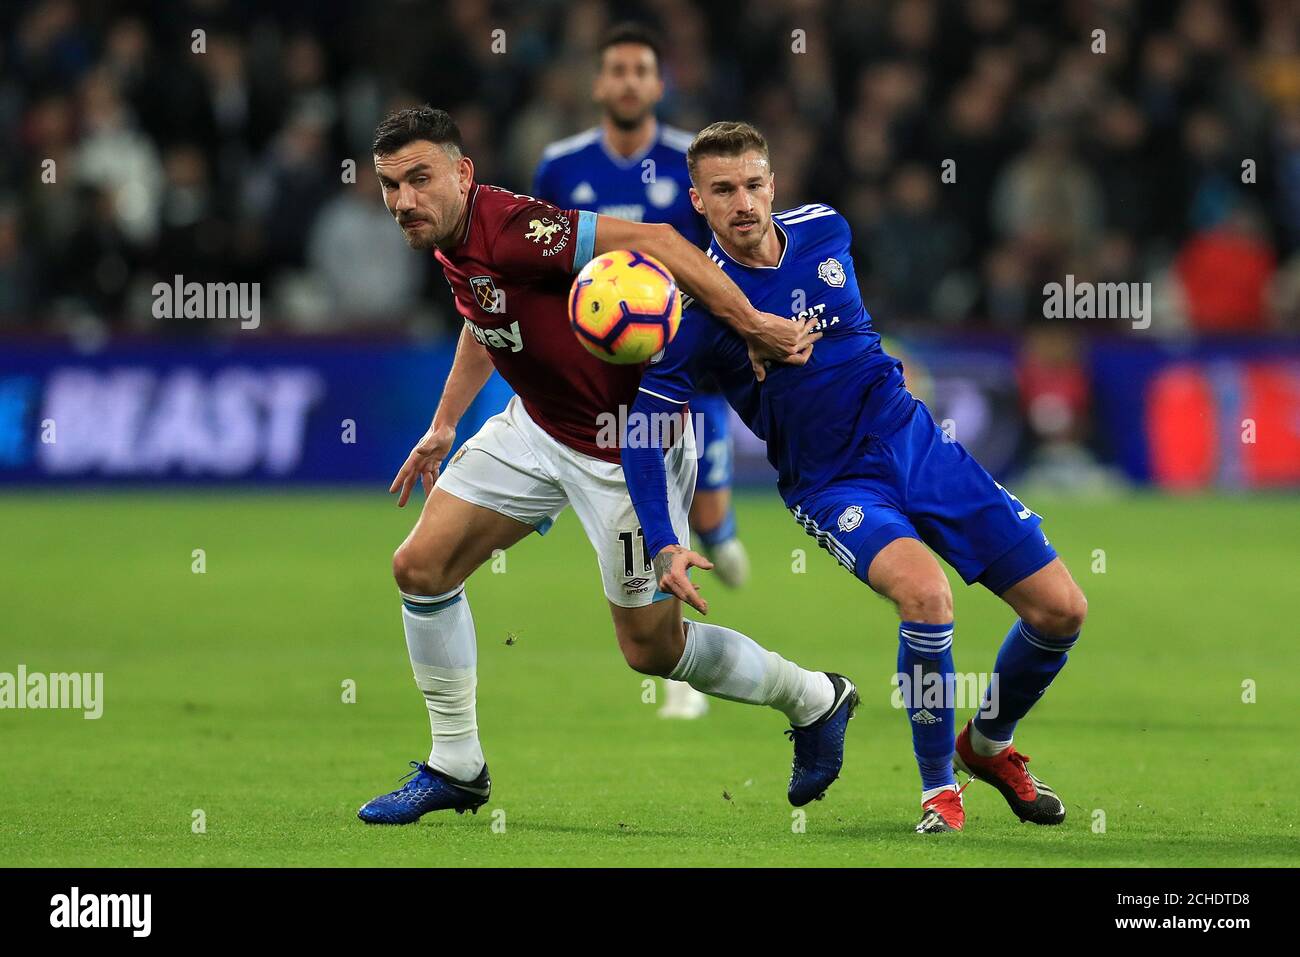 West Ham United's Robert Snodgrass (left) and Cardiff City's Joe Bennett battle for the ball during the Premier League match at the London Stadium. Stock Photo